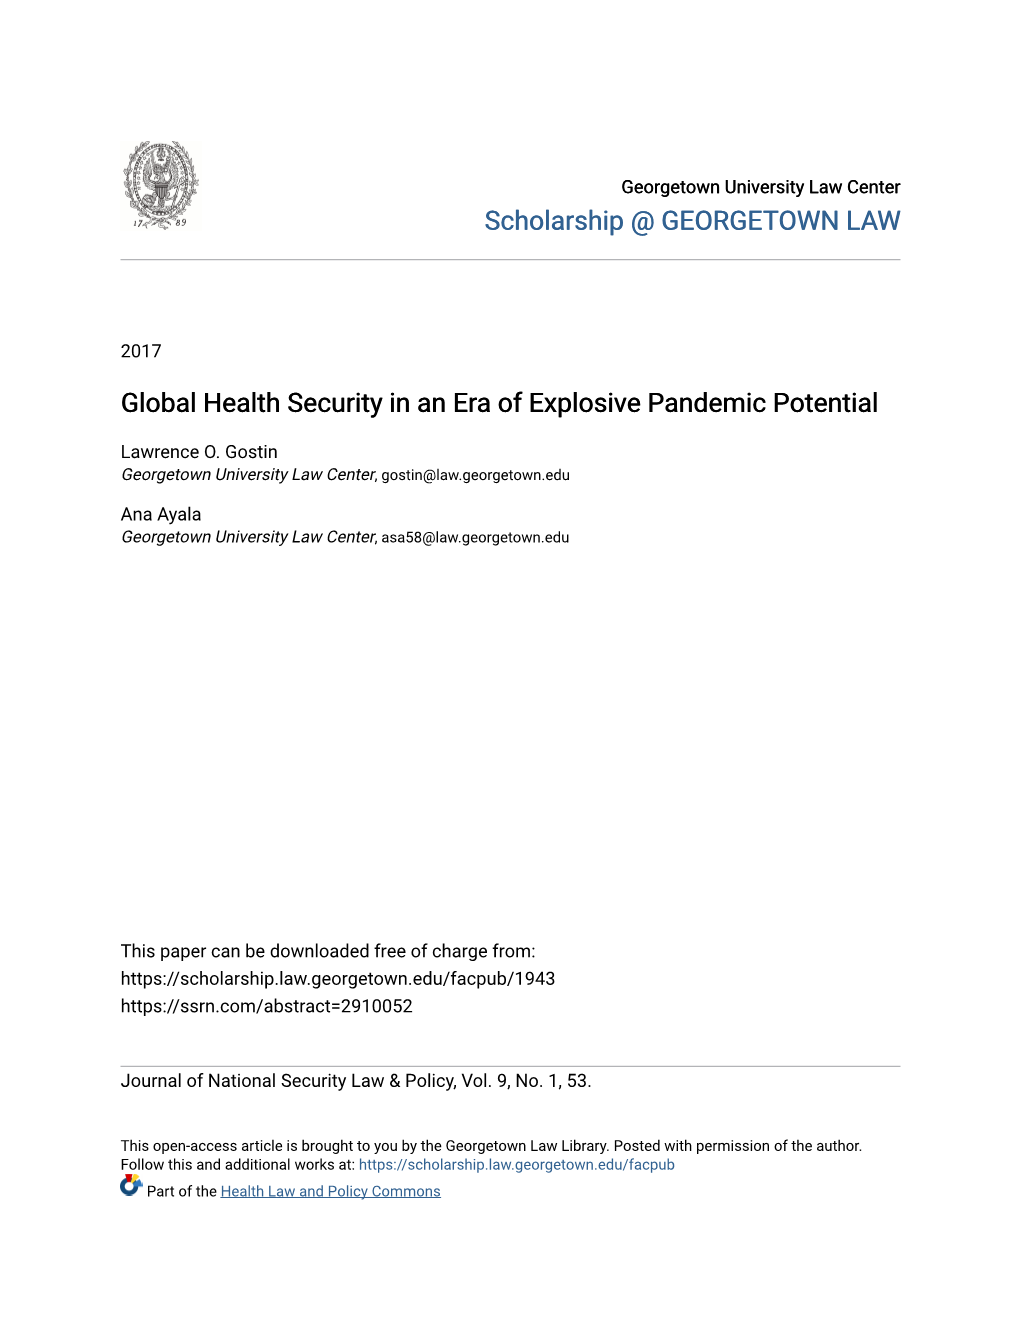 Global Health Security in an Era of Explosive Pandemic Potential